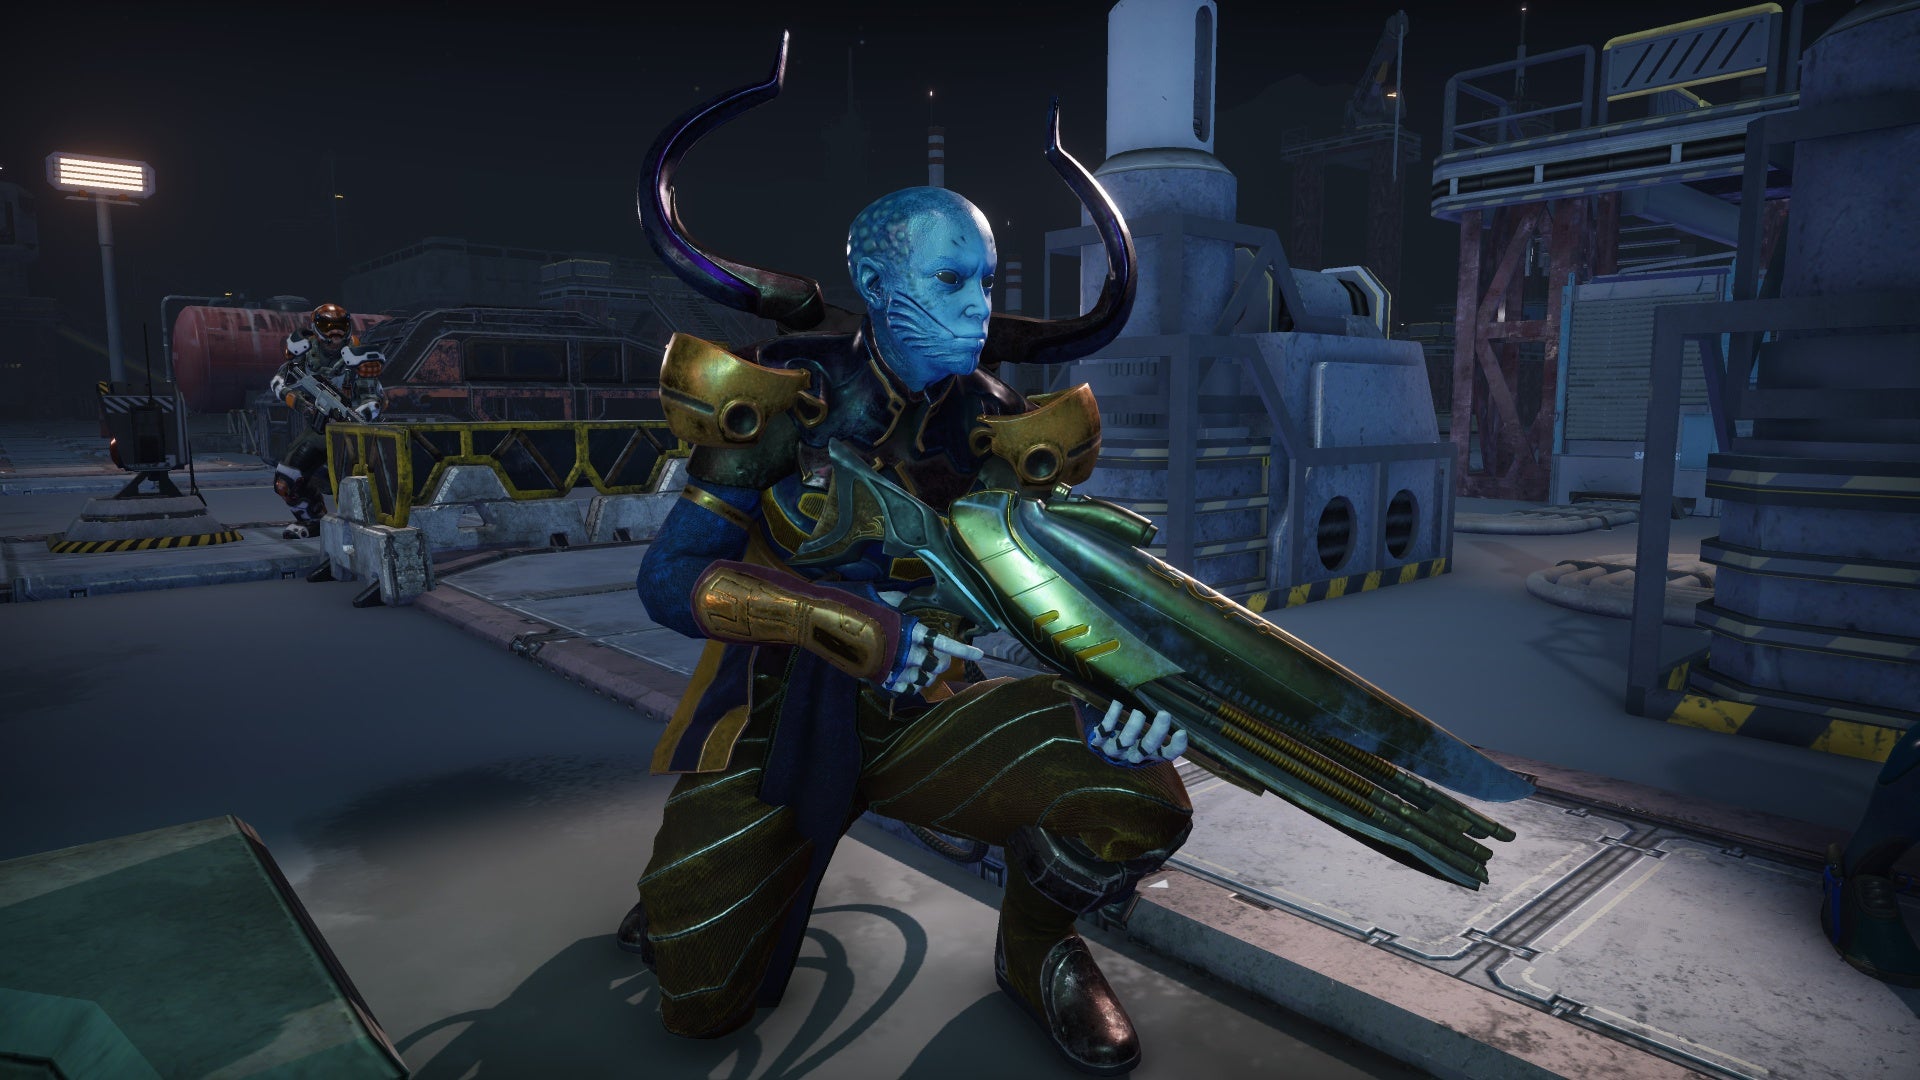 A screenshot showing a blue skin Mutoid crouching, holding a large rifle.